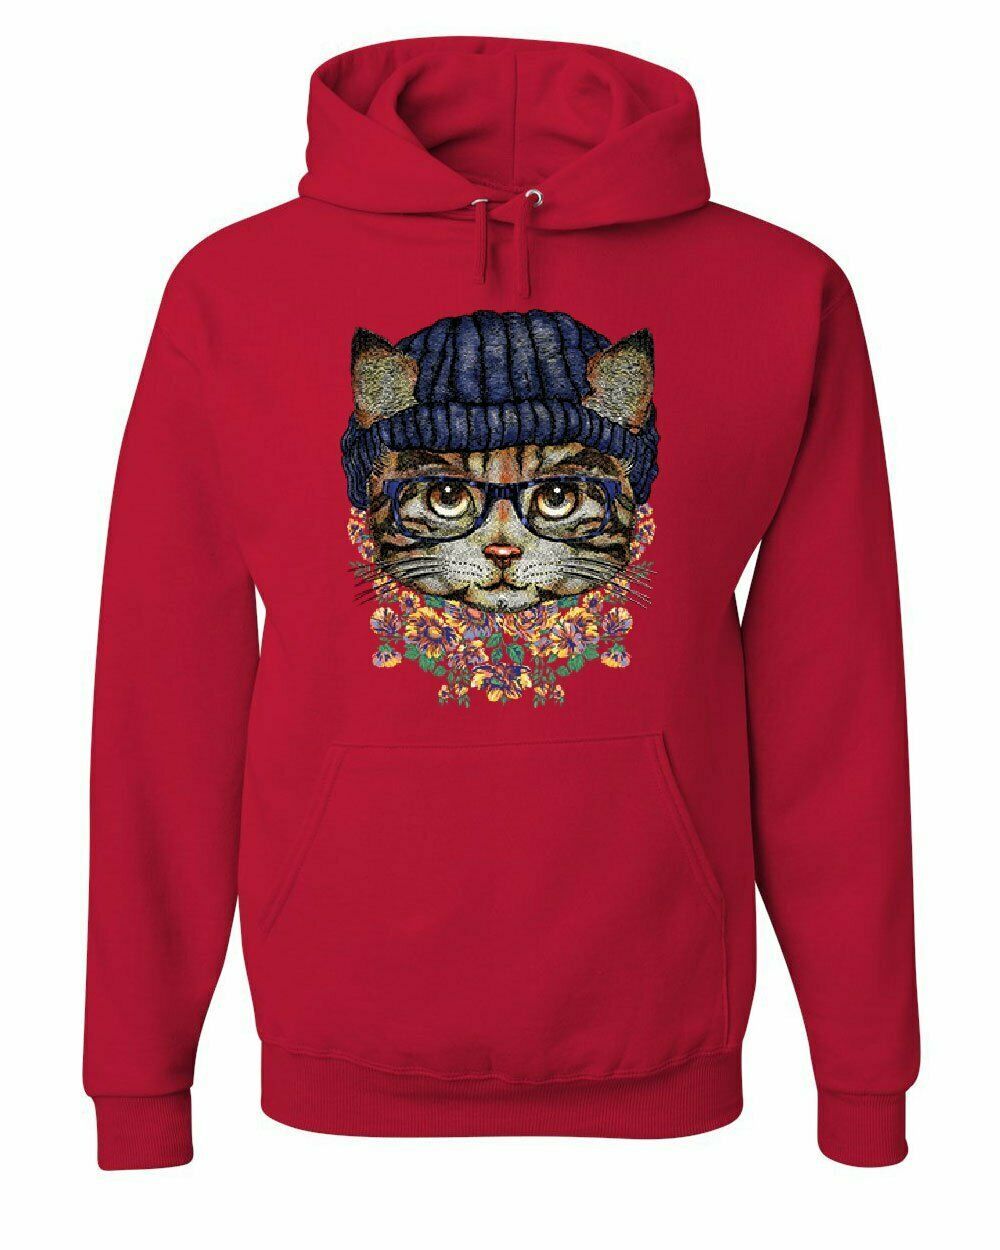 Hipster Kitty in Glasses Beanie Hoodie Cat Kitten Pop Culture ...